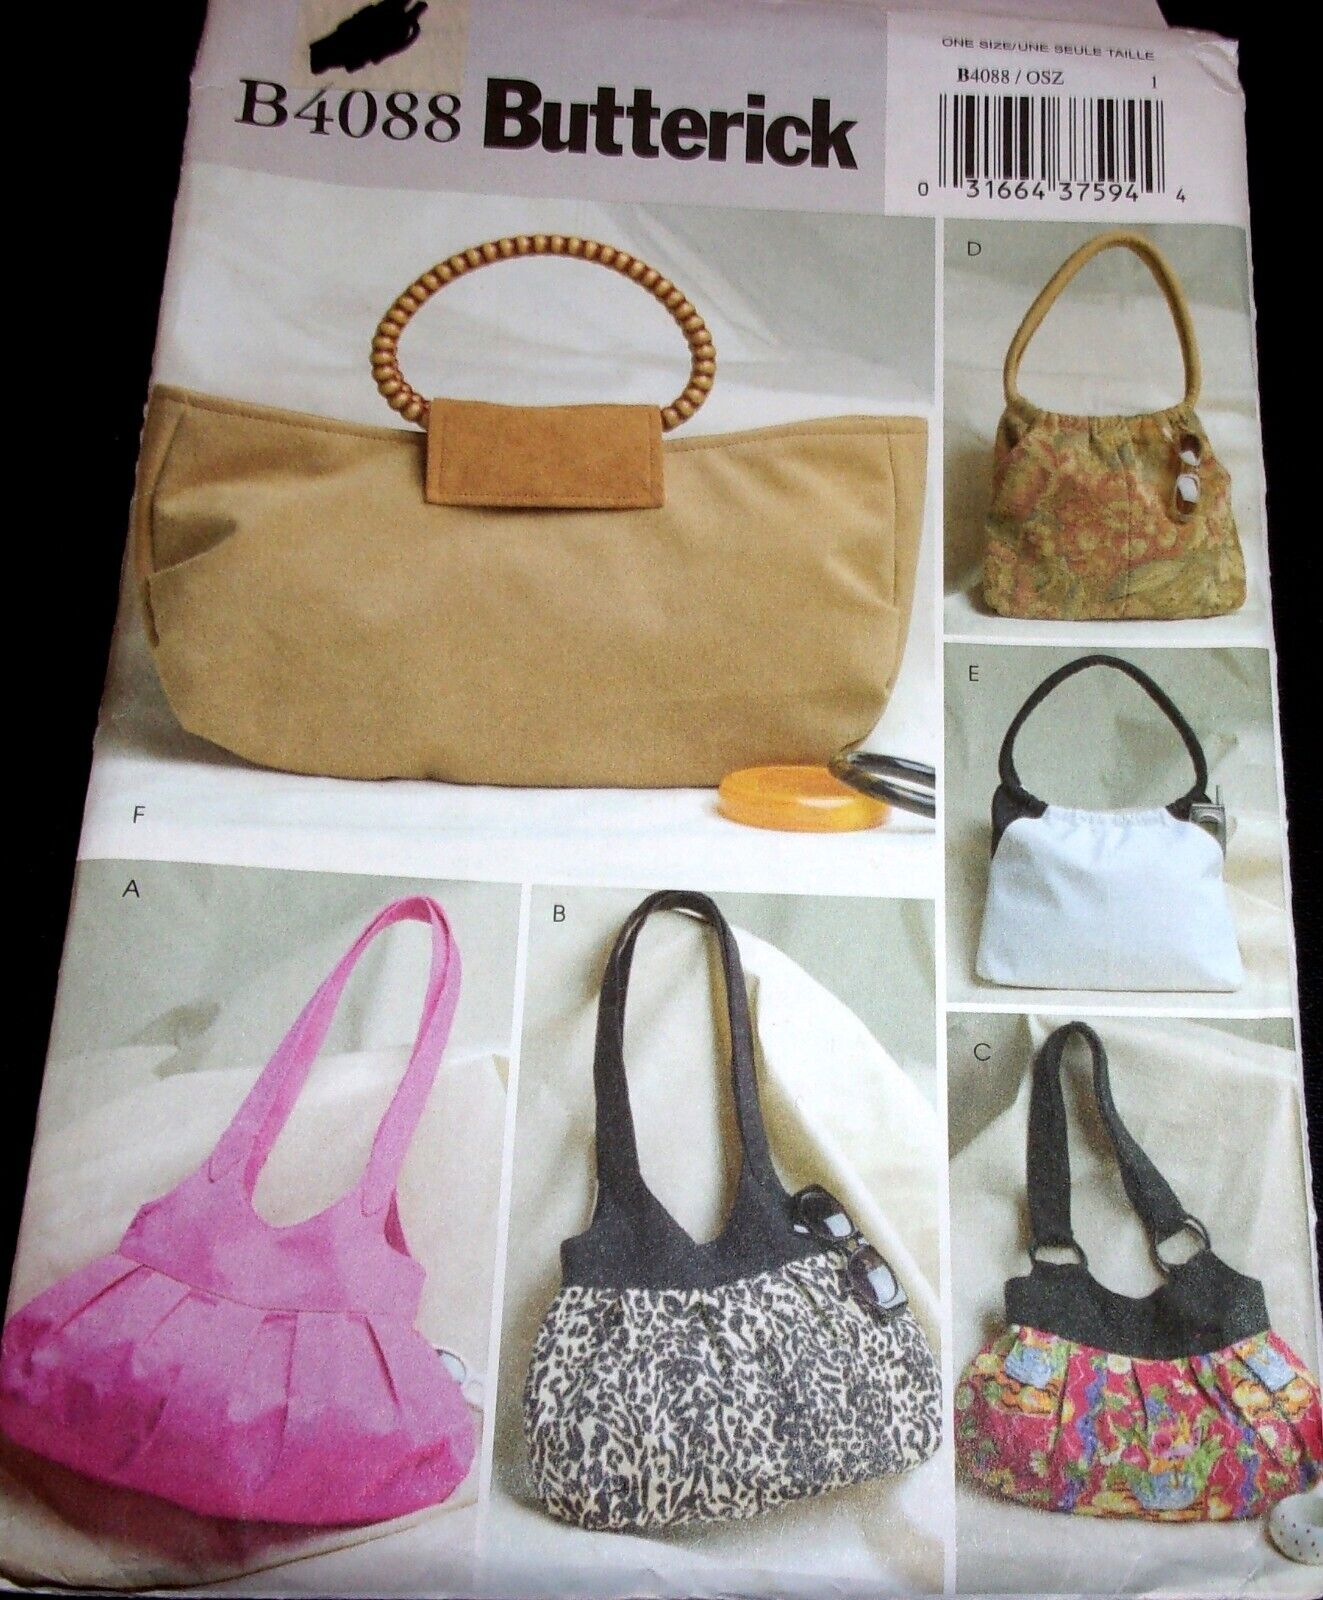 Butterick Pattern B4088 Bags Handbags Fashion Purse with Handle or Straps Uncut